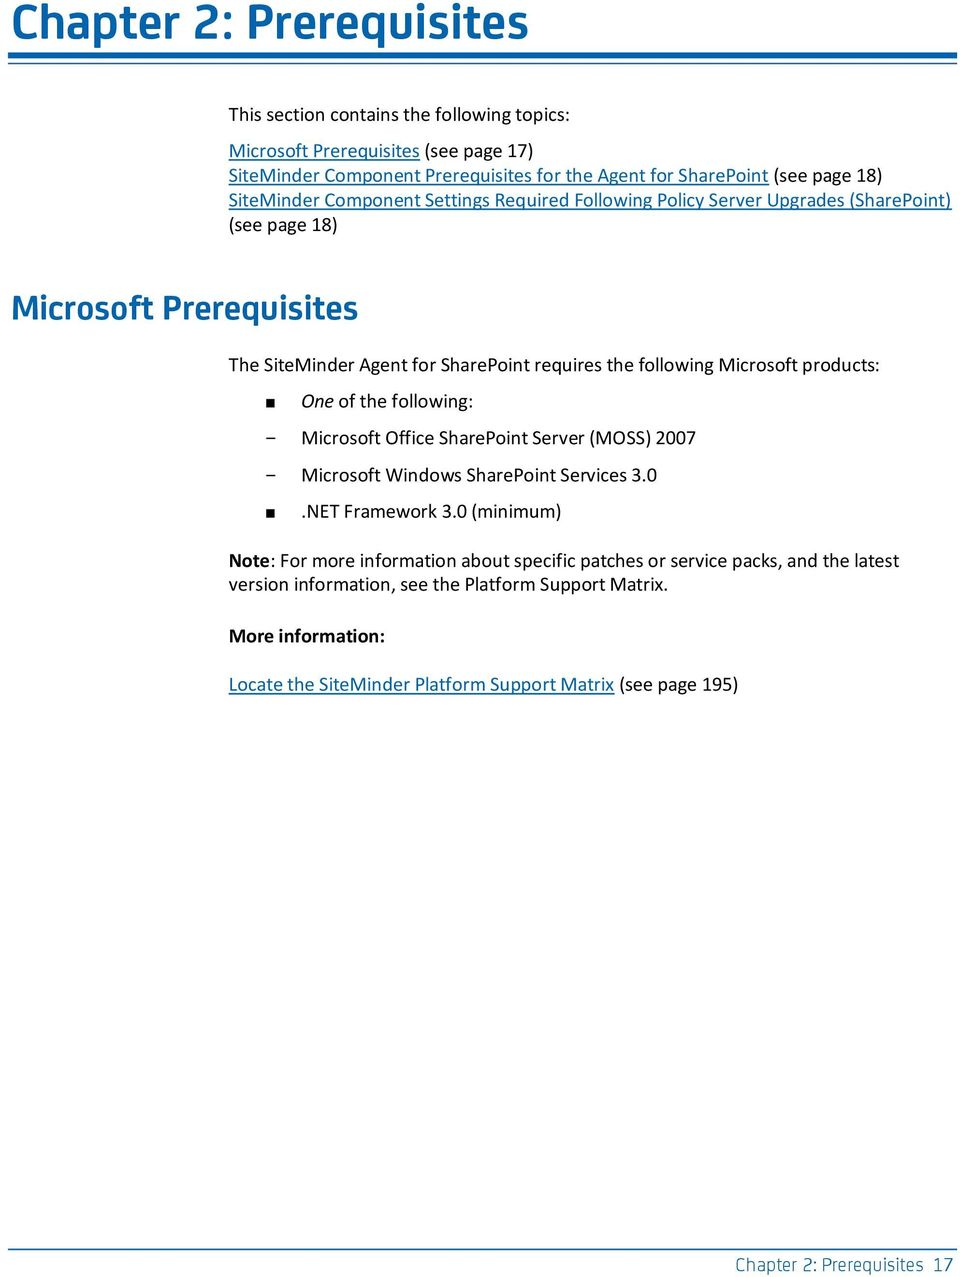 products: One of the following: Microsoft Office SharePoint Server (MOSS) 2007 Microsoft Windows SharePoint Services 3.0.NET Framework 3.